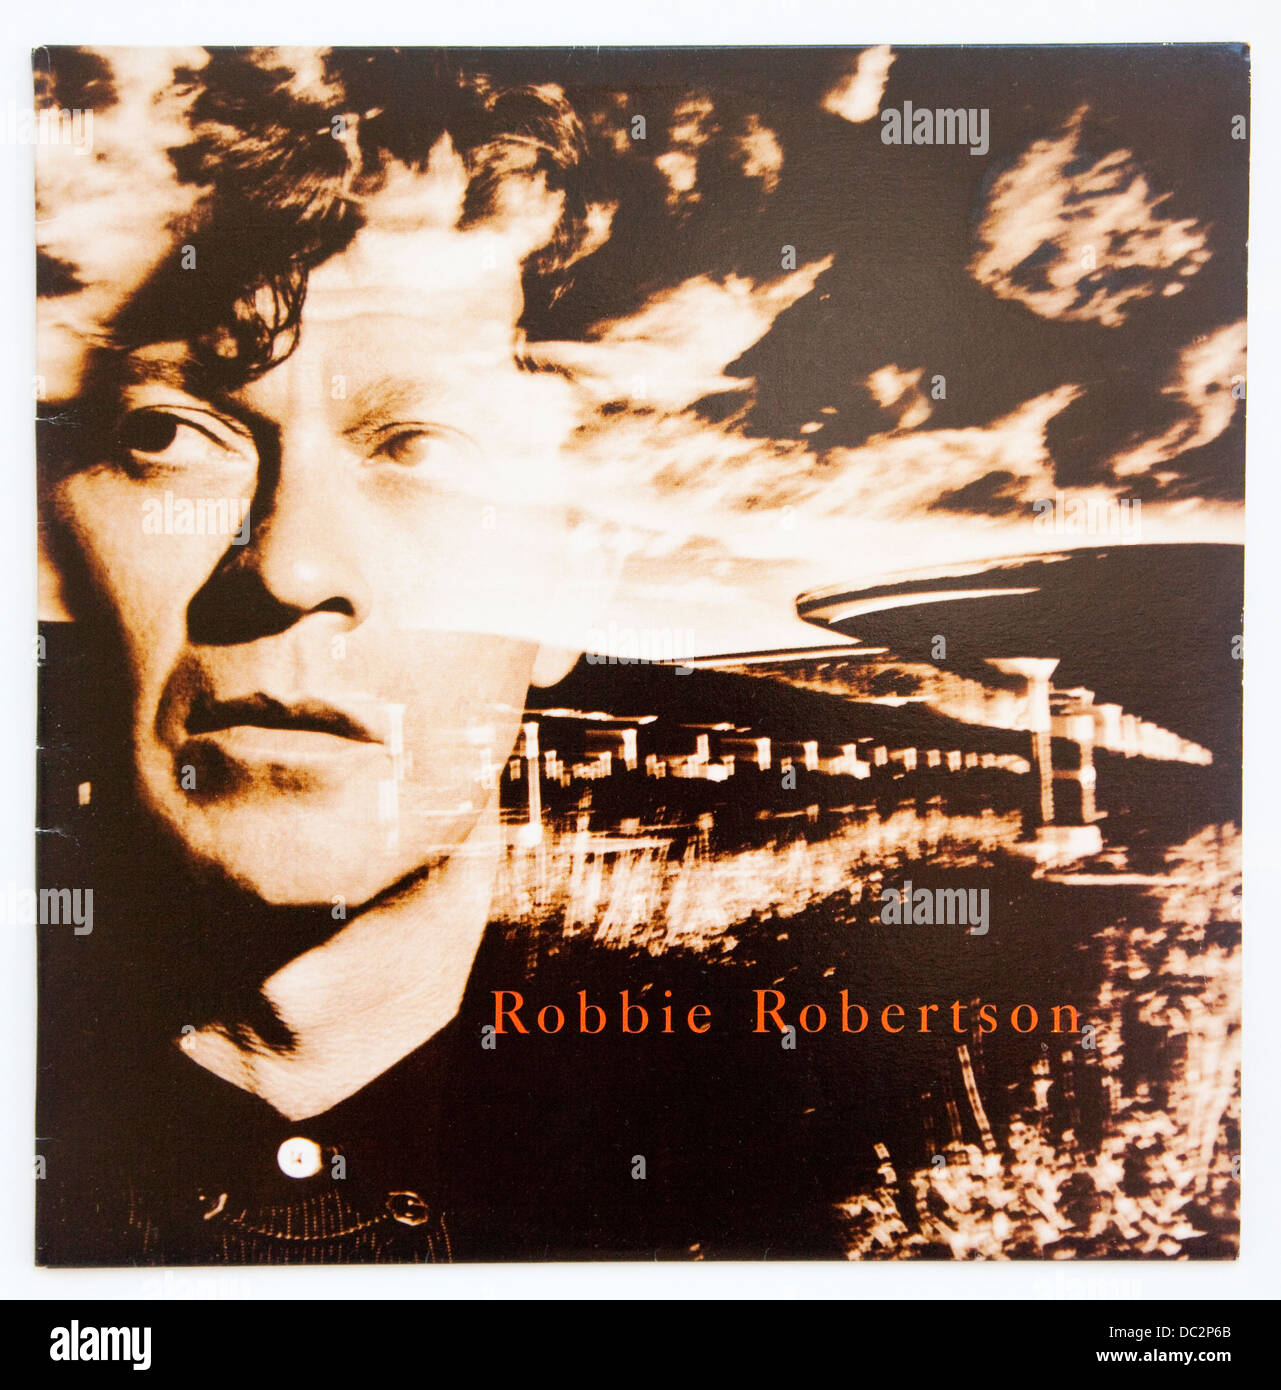 Robbie Robertson - Self-titled, 1987 album on Geffin Records - Editorial use only Stock Photo